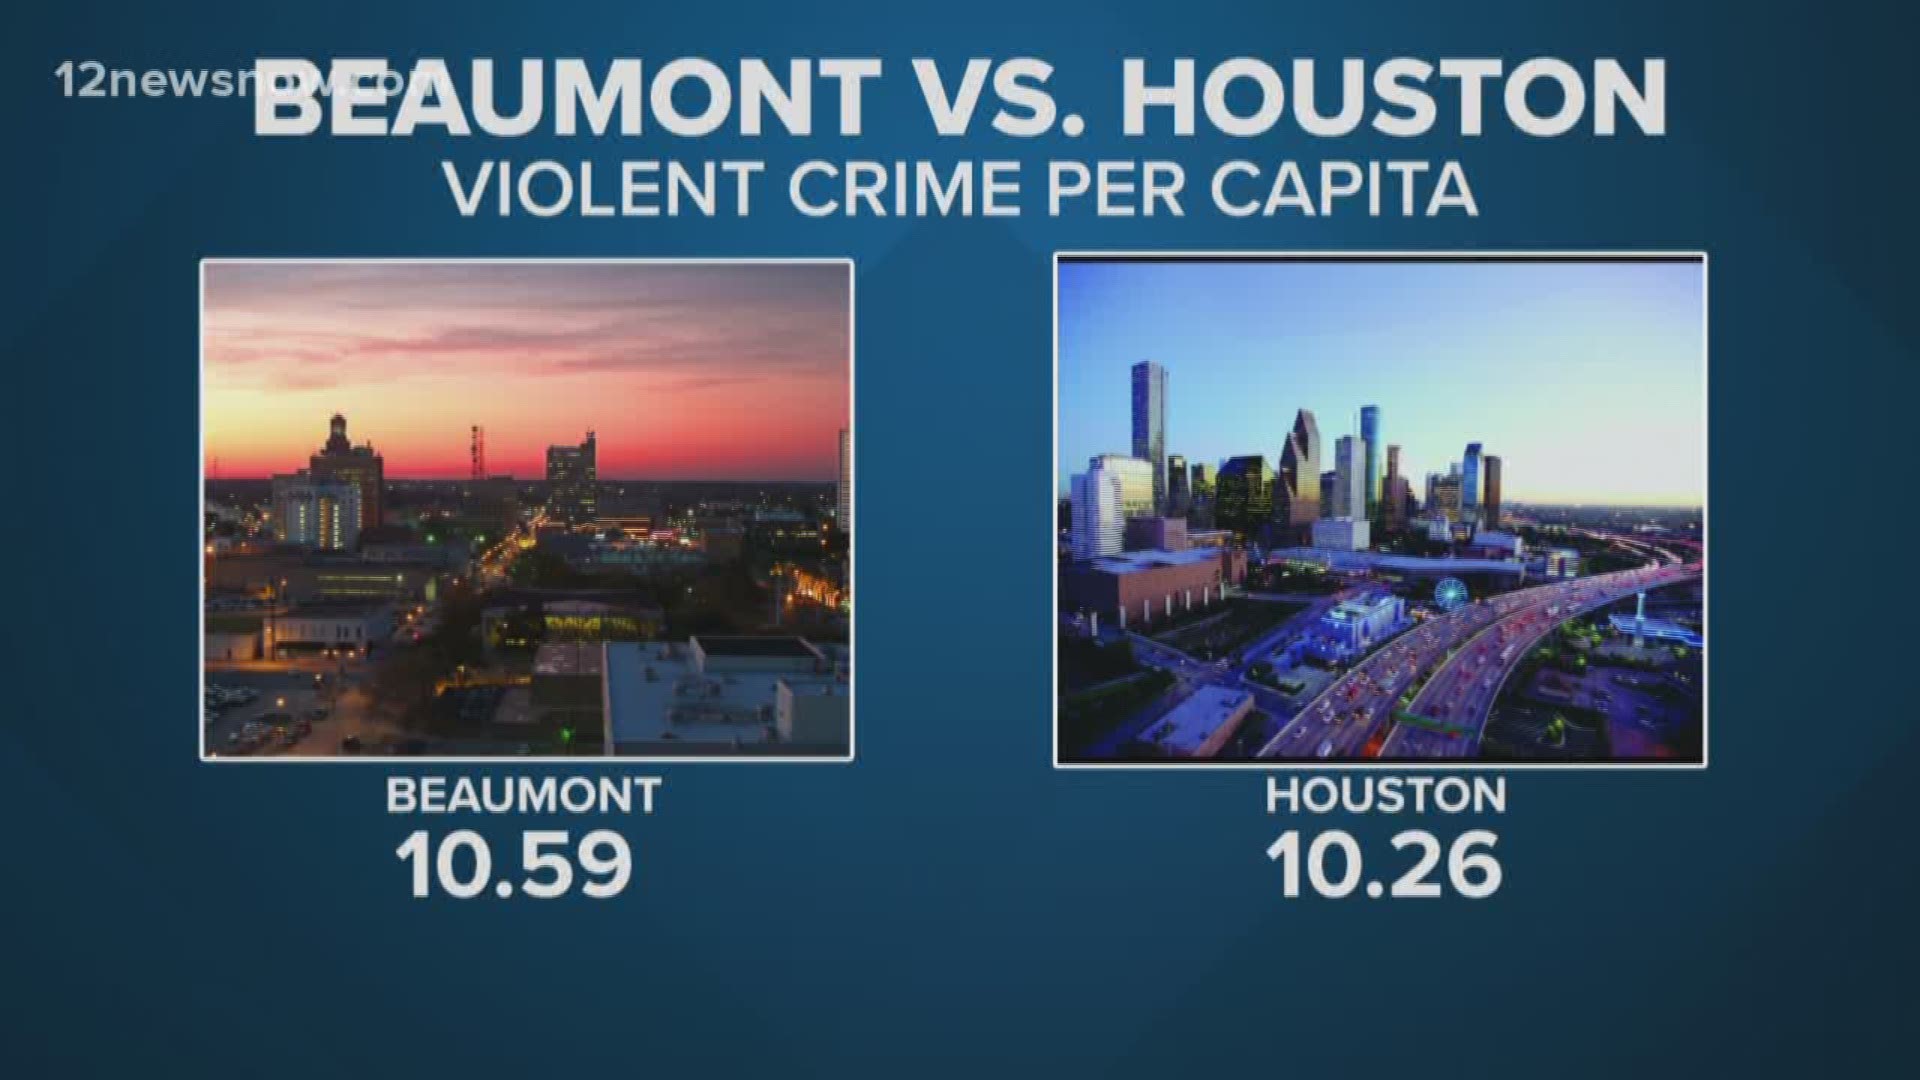 New numbers from the FBI show Beaumont's violent crime rate is as bad as Houston, when calculated per capita. This includes rapes, murders and robberies.